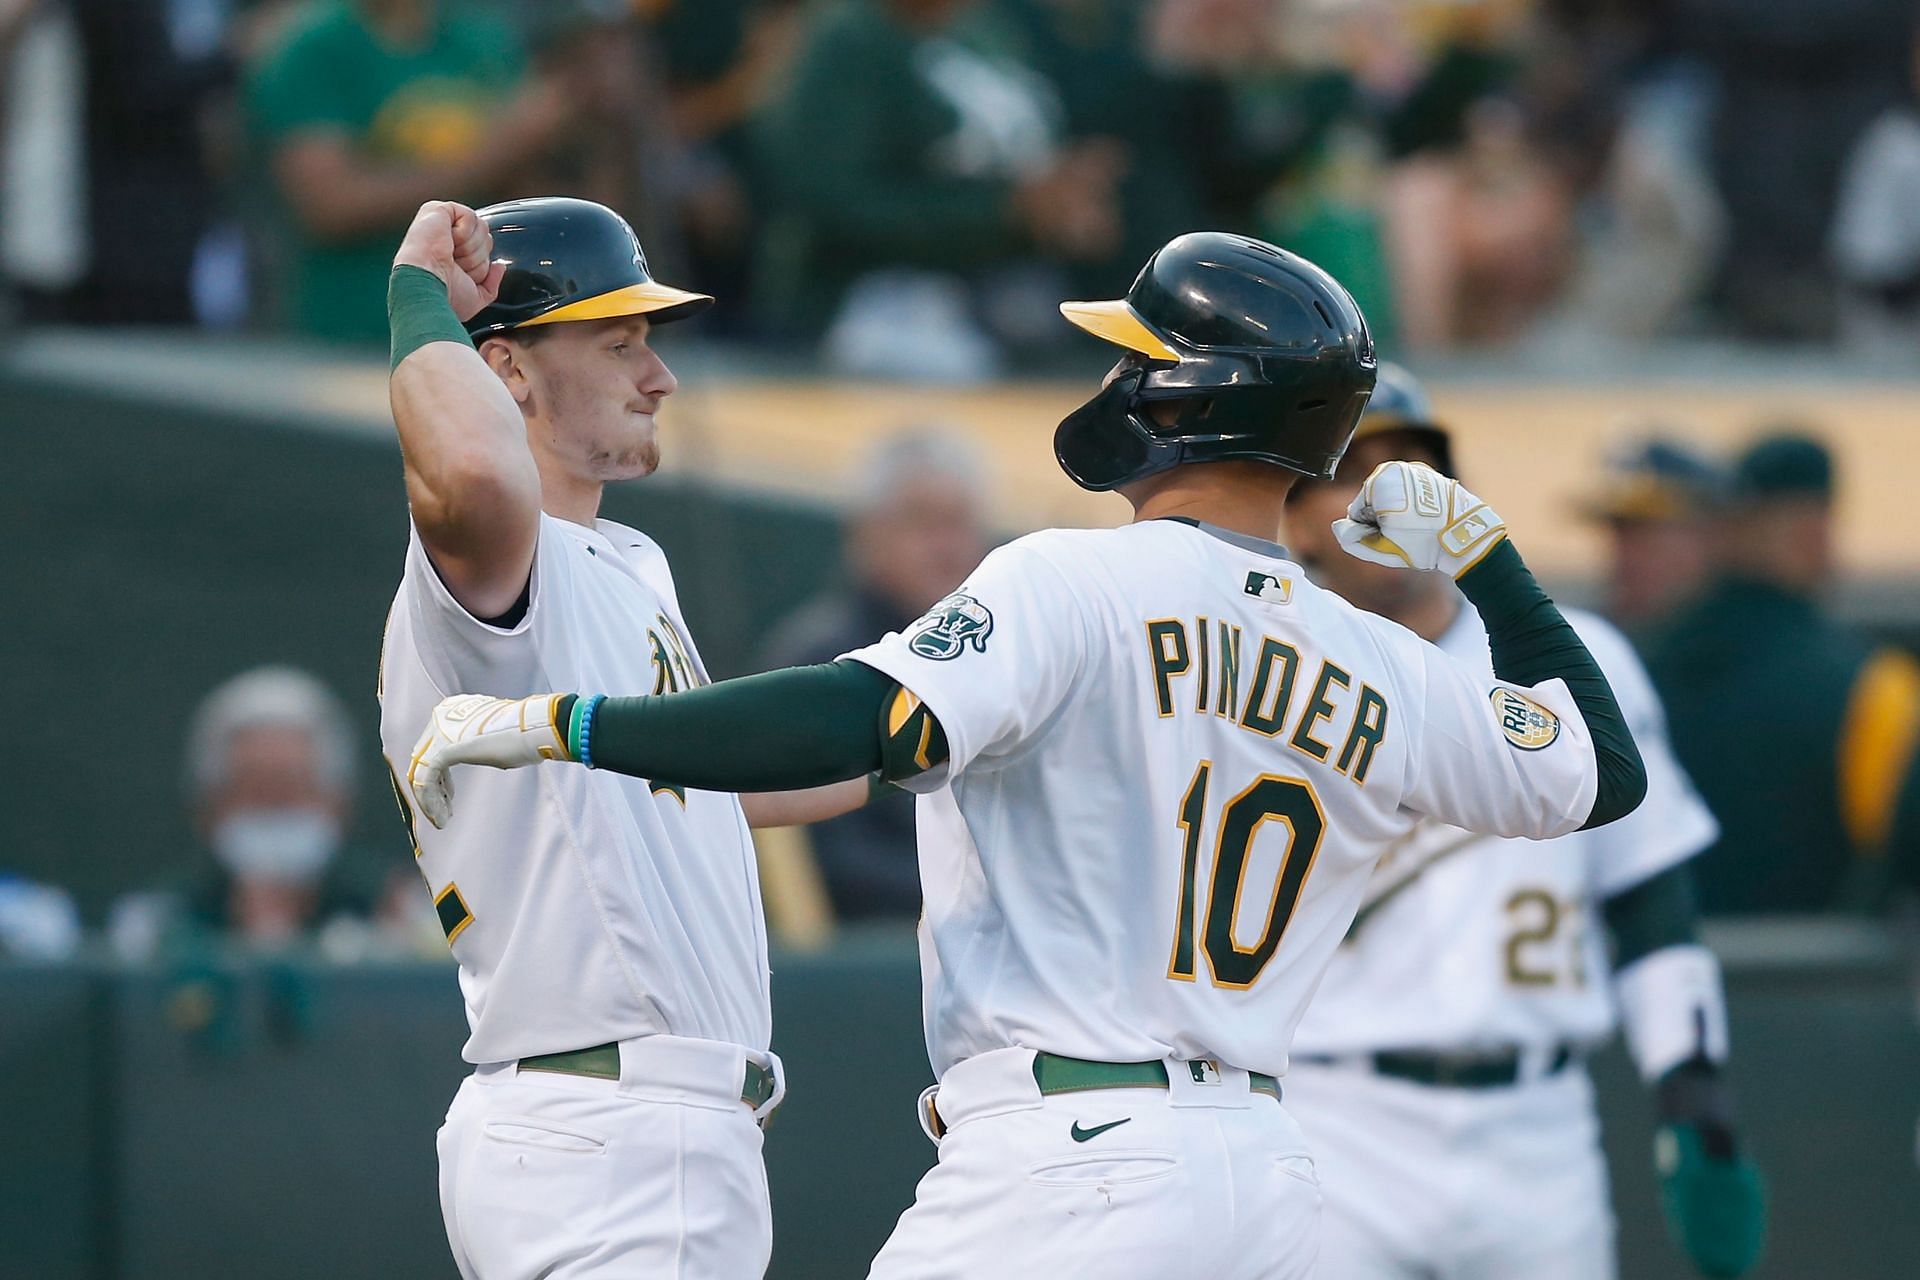 The Houston Astros and Oakland Athletics meet again on Wednesday.